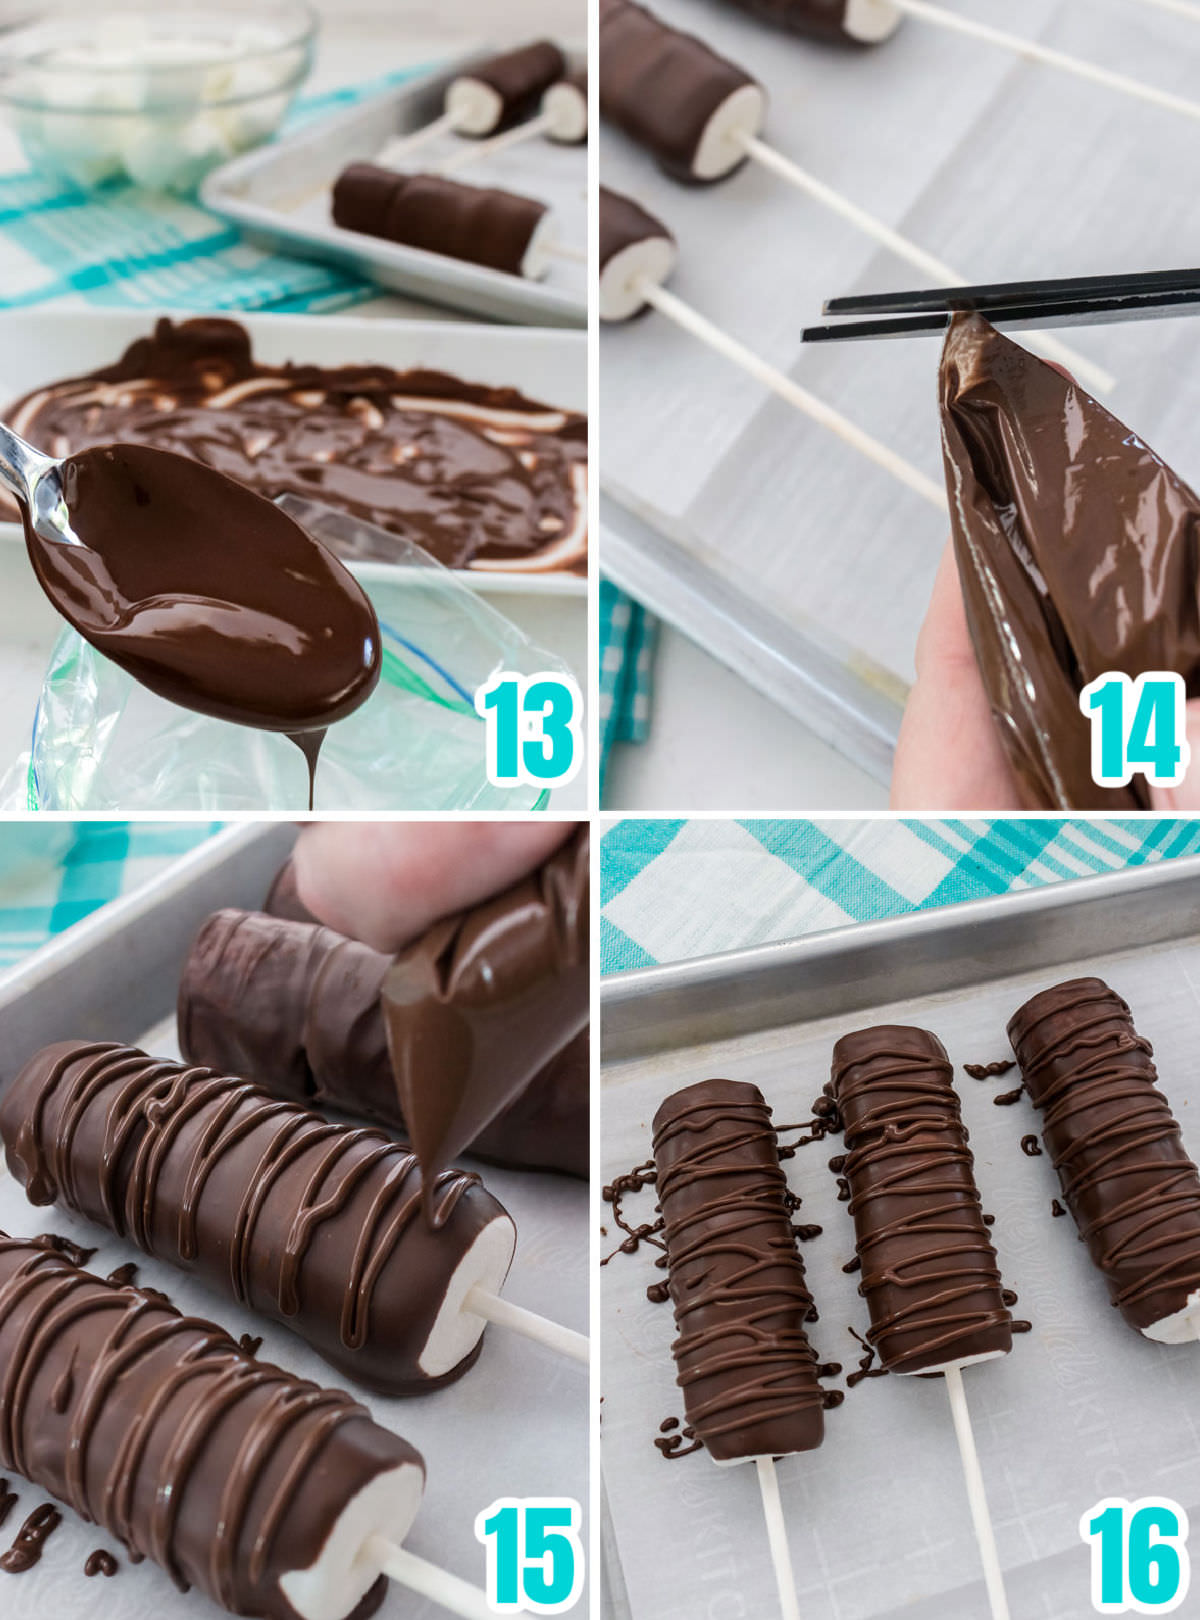 Collage image showing the steps for decorating the marshmallow pops with a drizzle of chocolate.